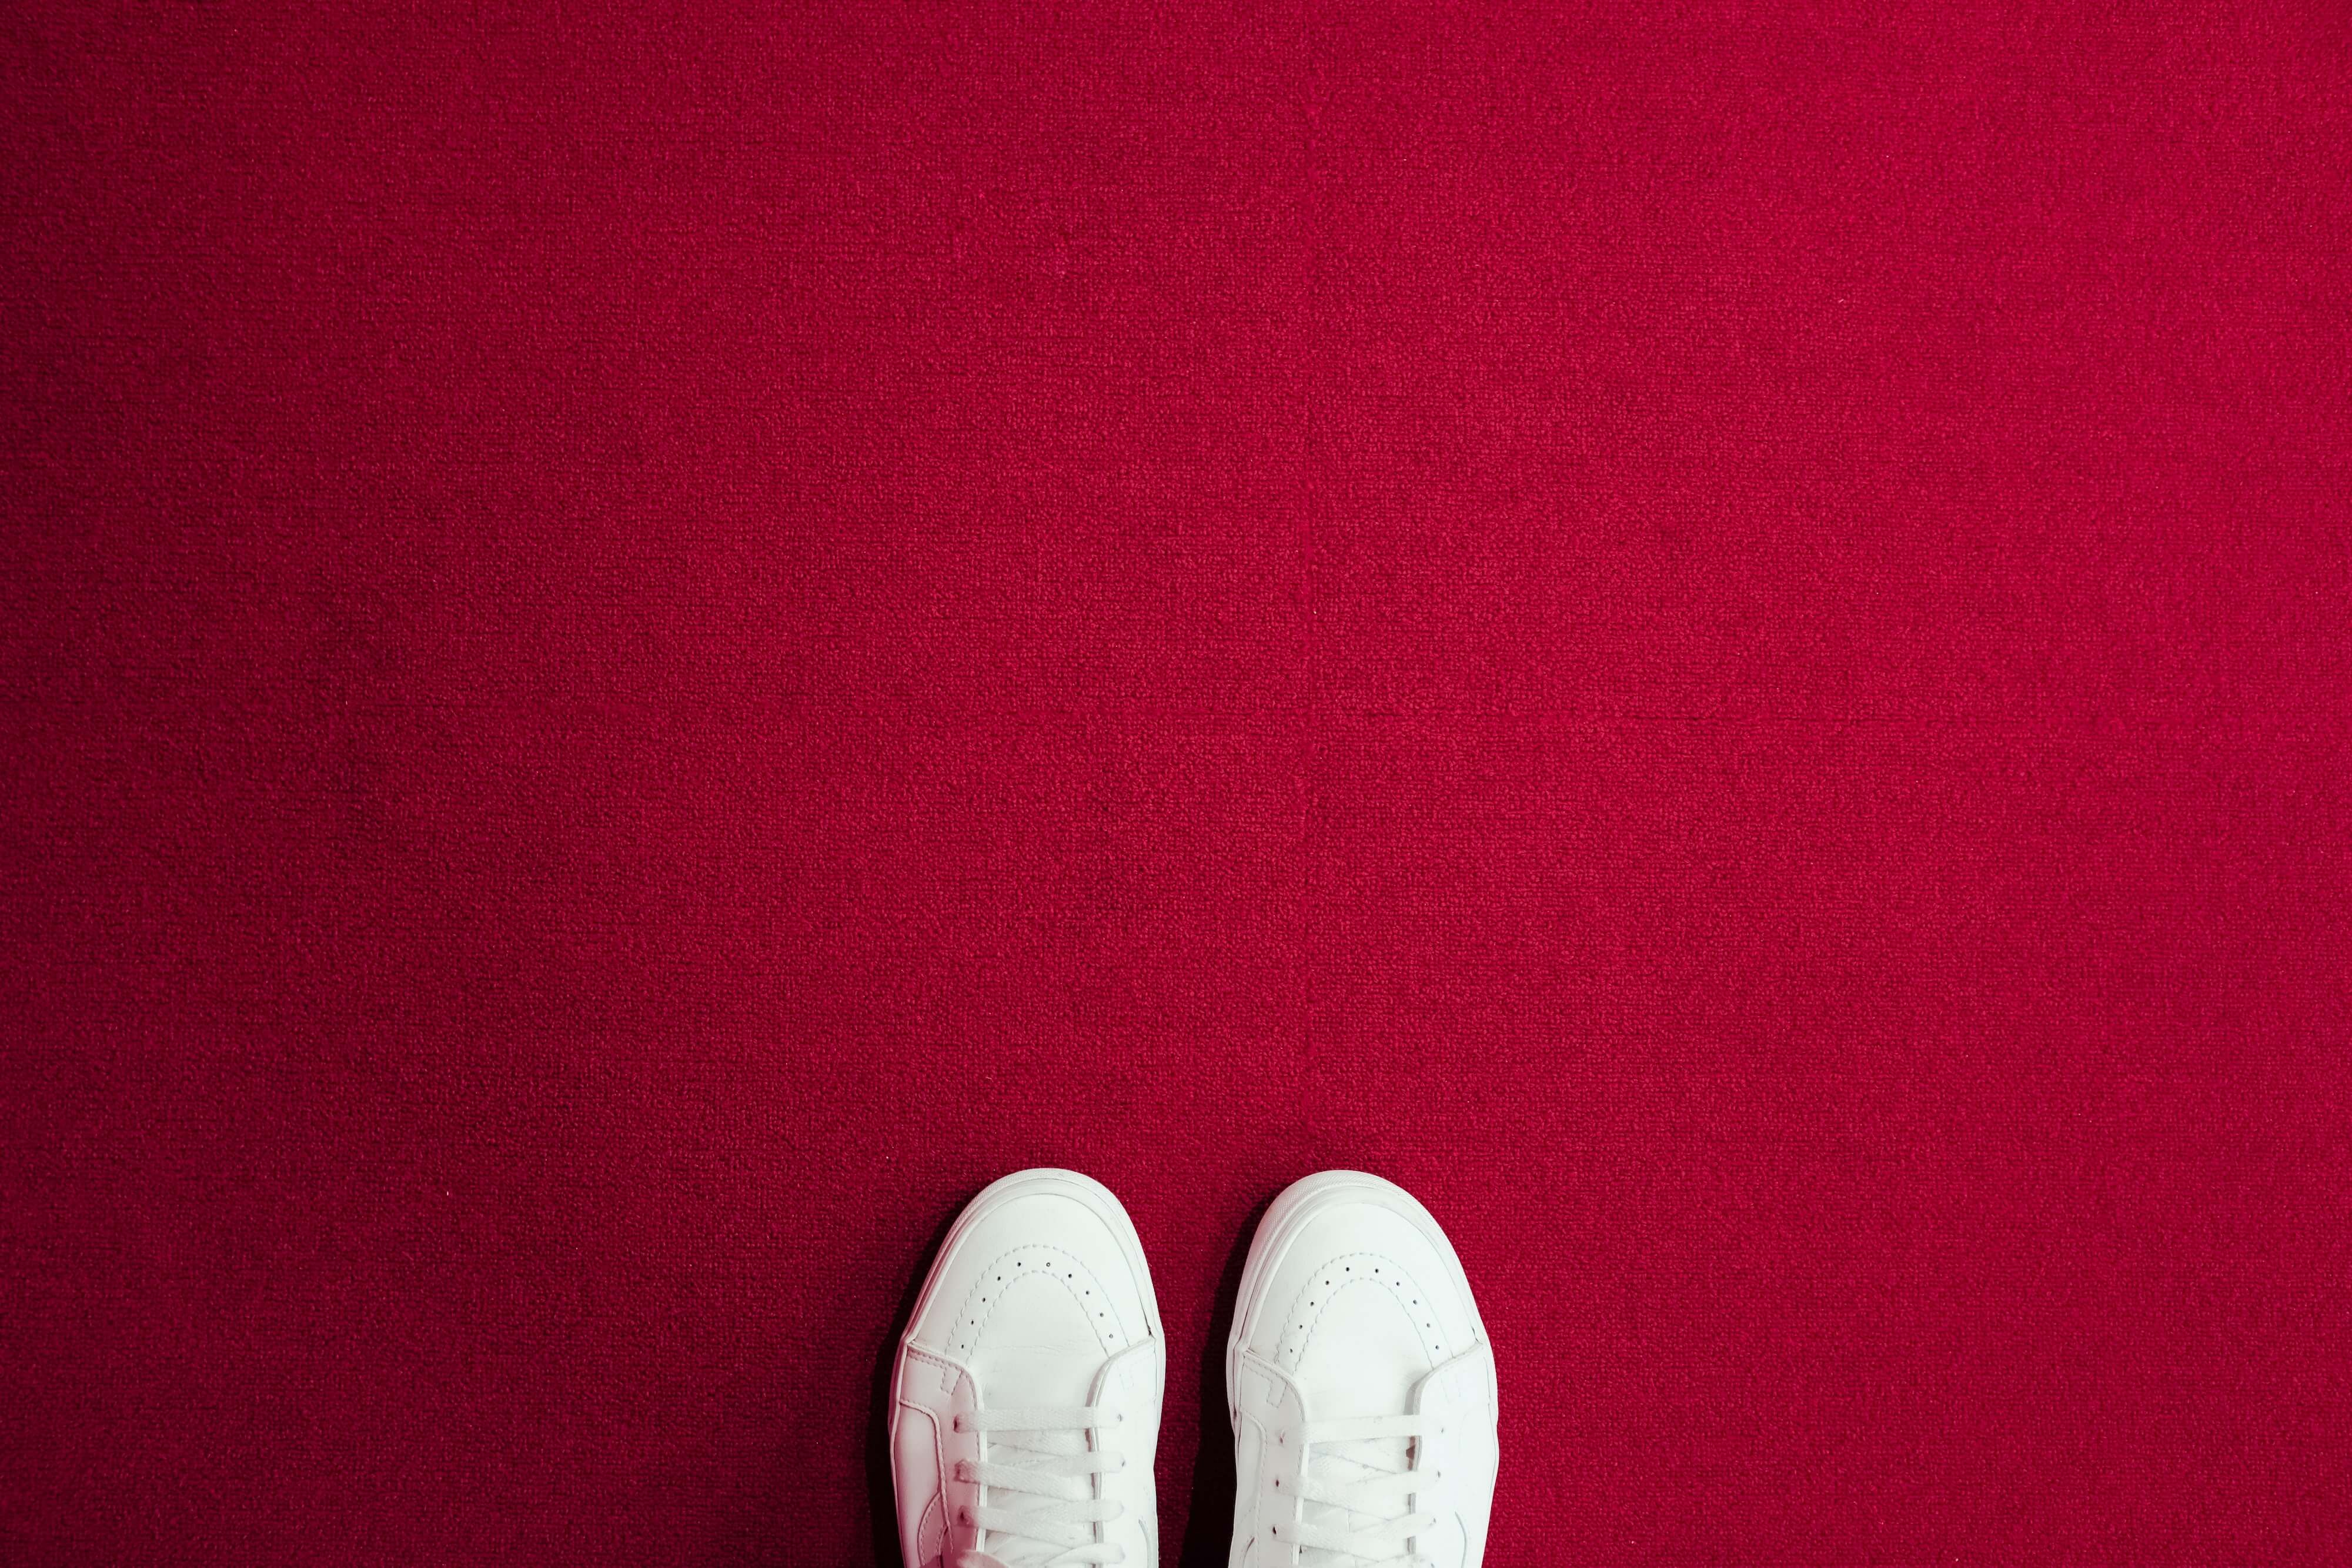 white shoes on red carpet